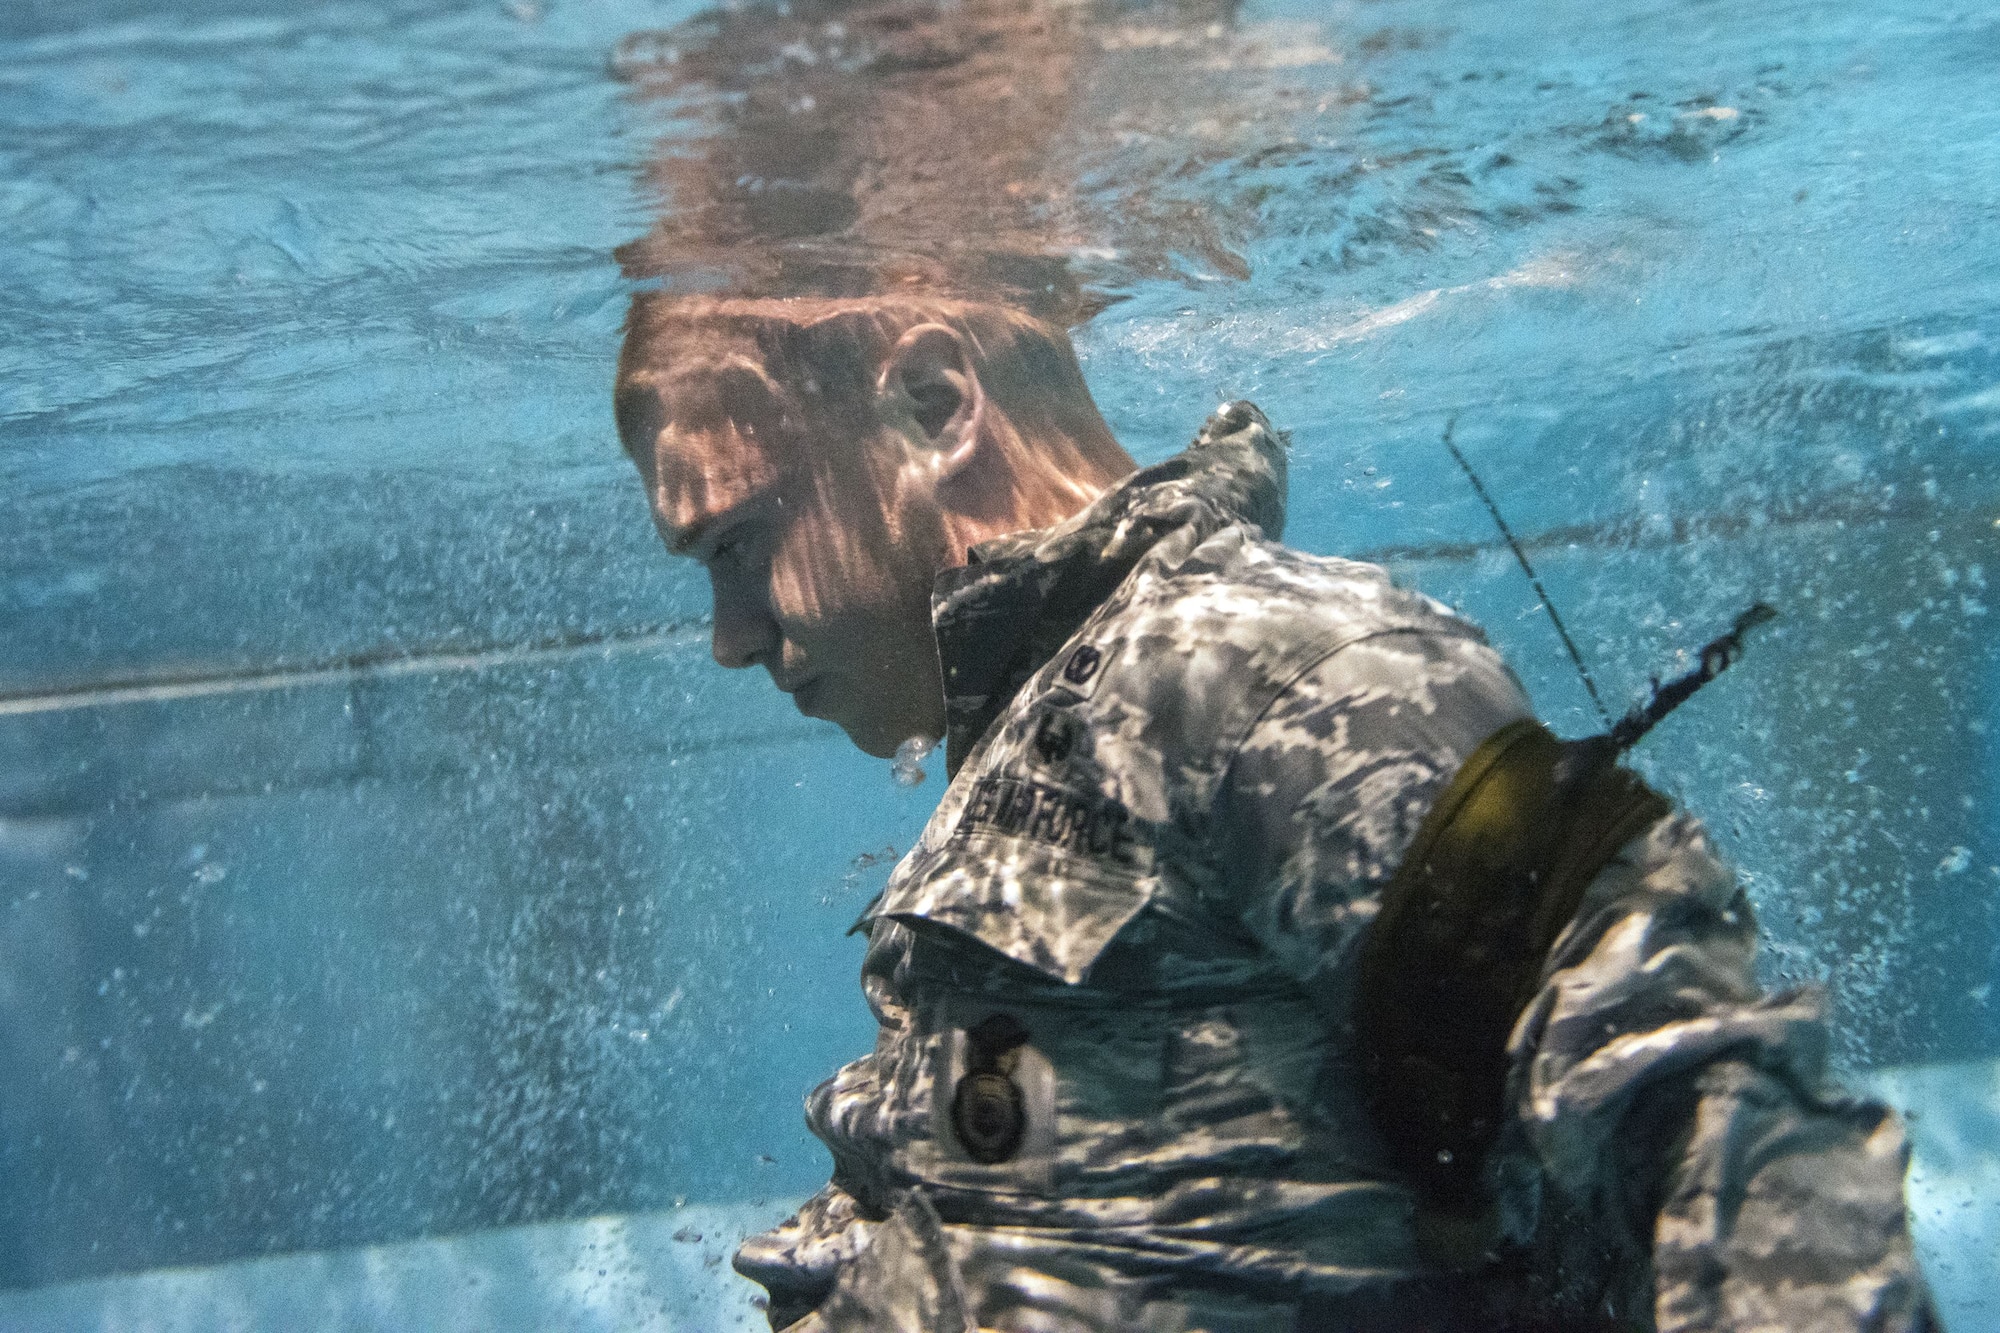 An Airman attempts to ditch his gear while underwater during a water survival assessment, Feb. 9, 2018, at Moody Air Force Base, Ga. The assessment is part of a three-day ranger assessment that’s designed to determine whether Airmen are ready to attend the Air Force pre Ranger-Assessment Course held at Fort Bliss Army post, Tx. The Ranger cadre test Airmen’s physical fitness, tactical abilities, land navigation skills, leadership qualities, water confidence and academic ability to determine if they have the knowledge and will to become Ranger qualified. (U.S. Air Force photo by Airman Eugene Oliver)